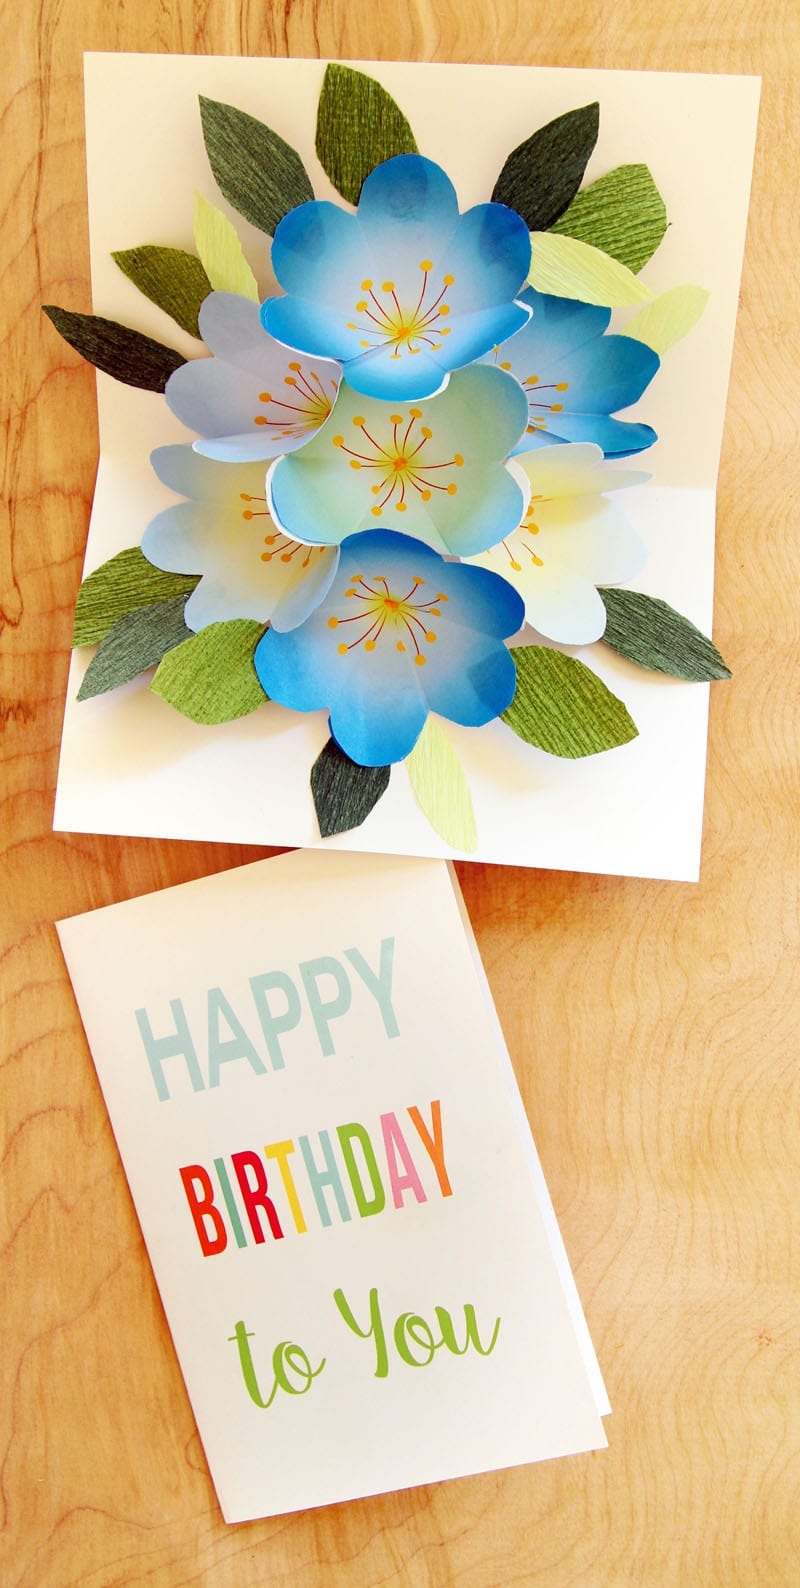 Free Printable Happy Birthday Card With Pop Up Bouquet - A Piece Of - Free Printable Pop Up Birthday Card Templates